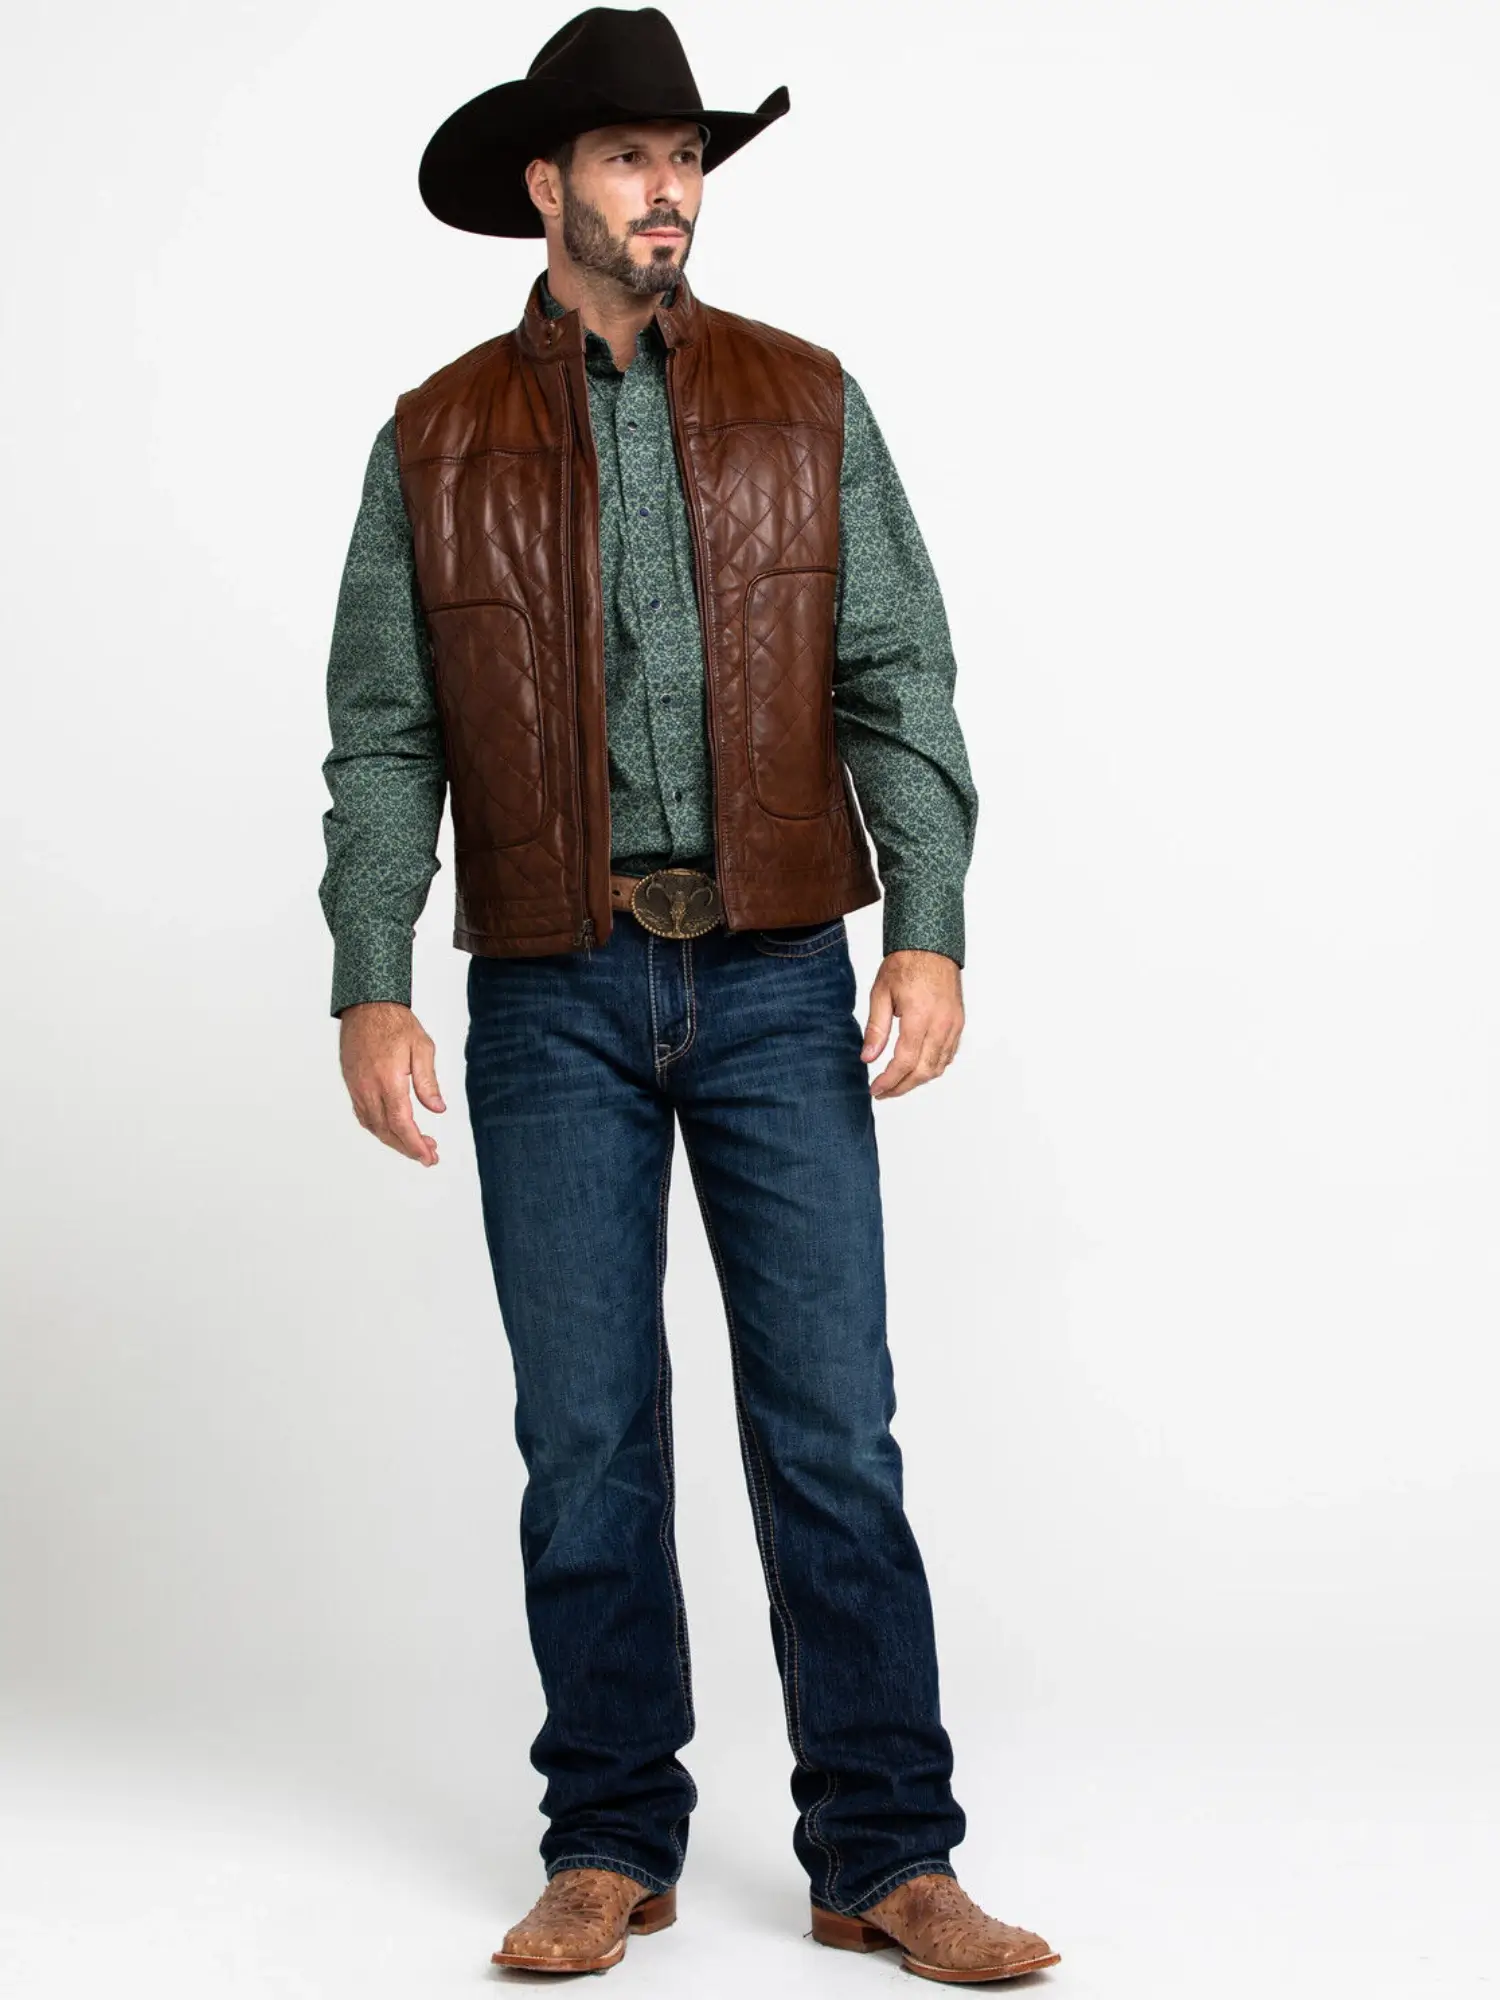 Men’s Quilted Leather Vest